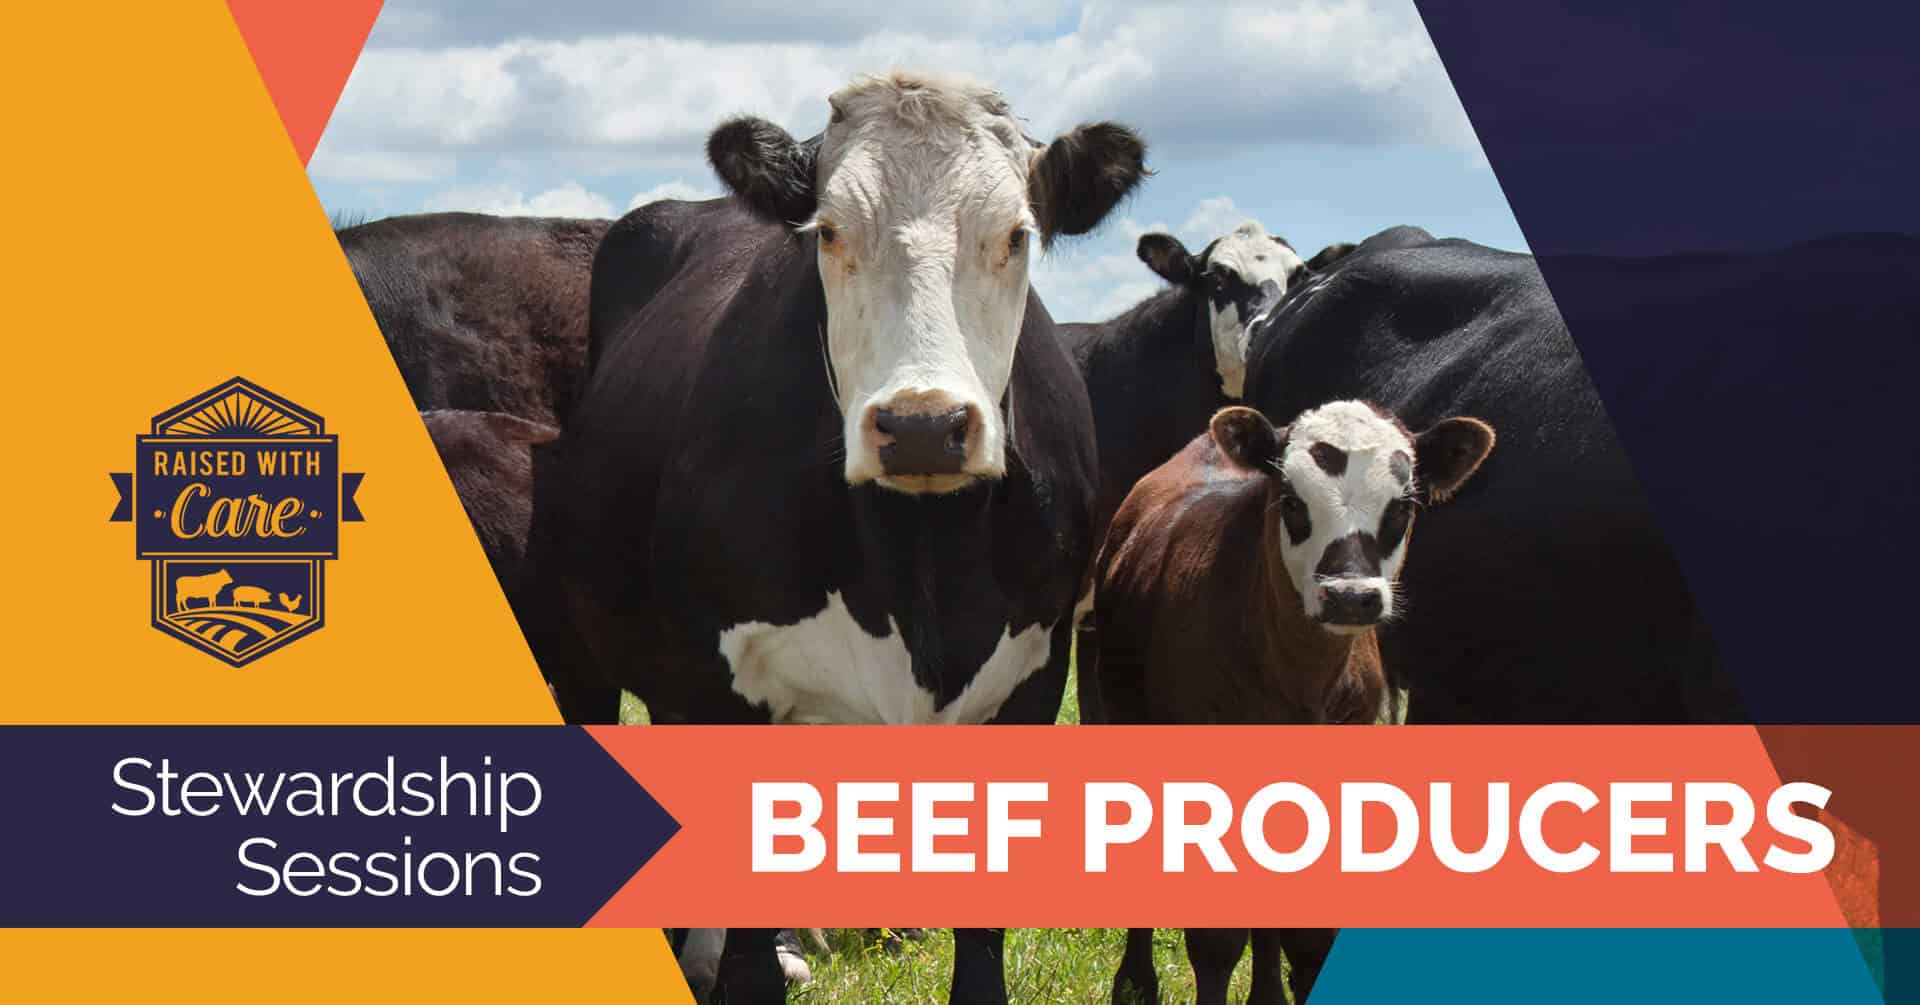 Raised With Care: Stewardship Sessions Beef Producers